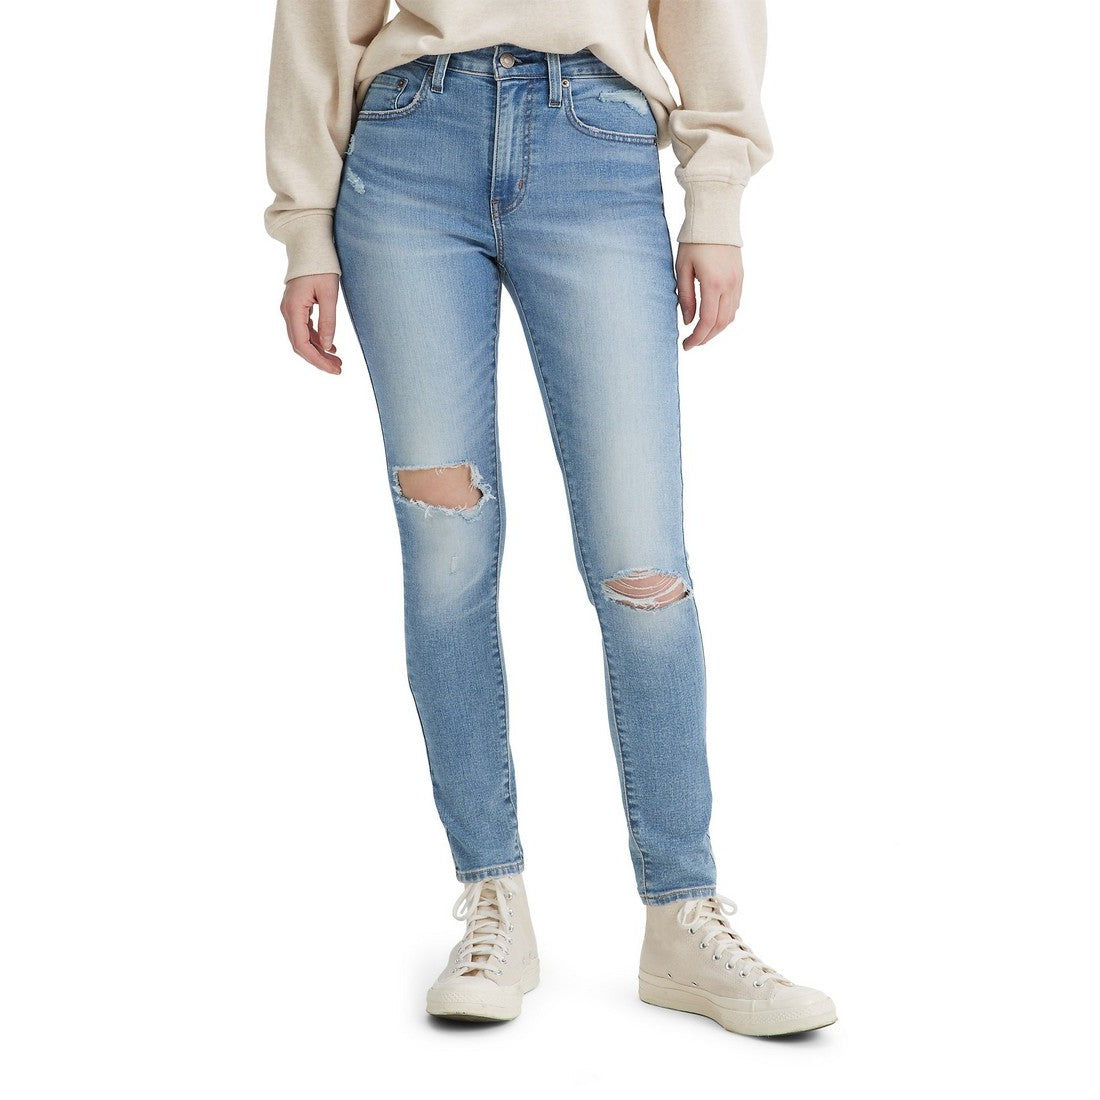 Levi Women's 721 High Rise Skinny Jeans - High Beams